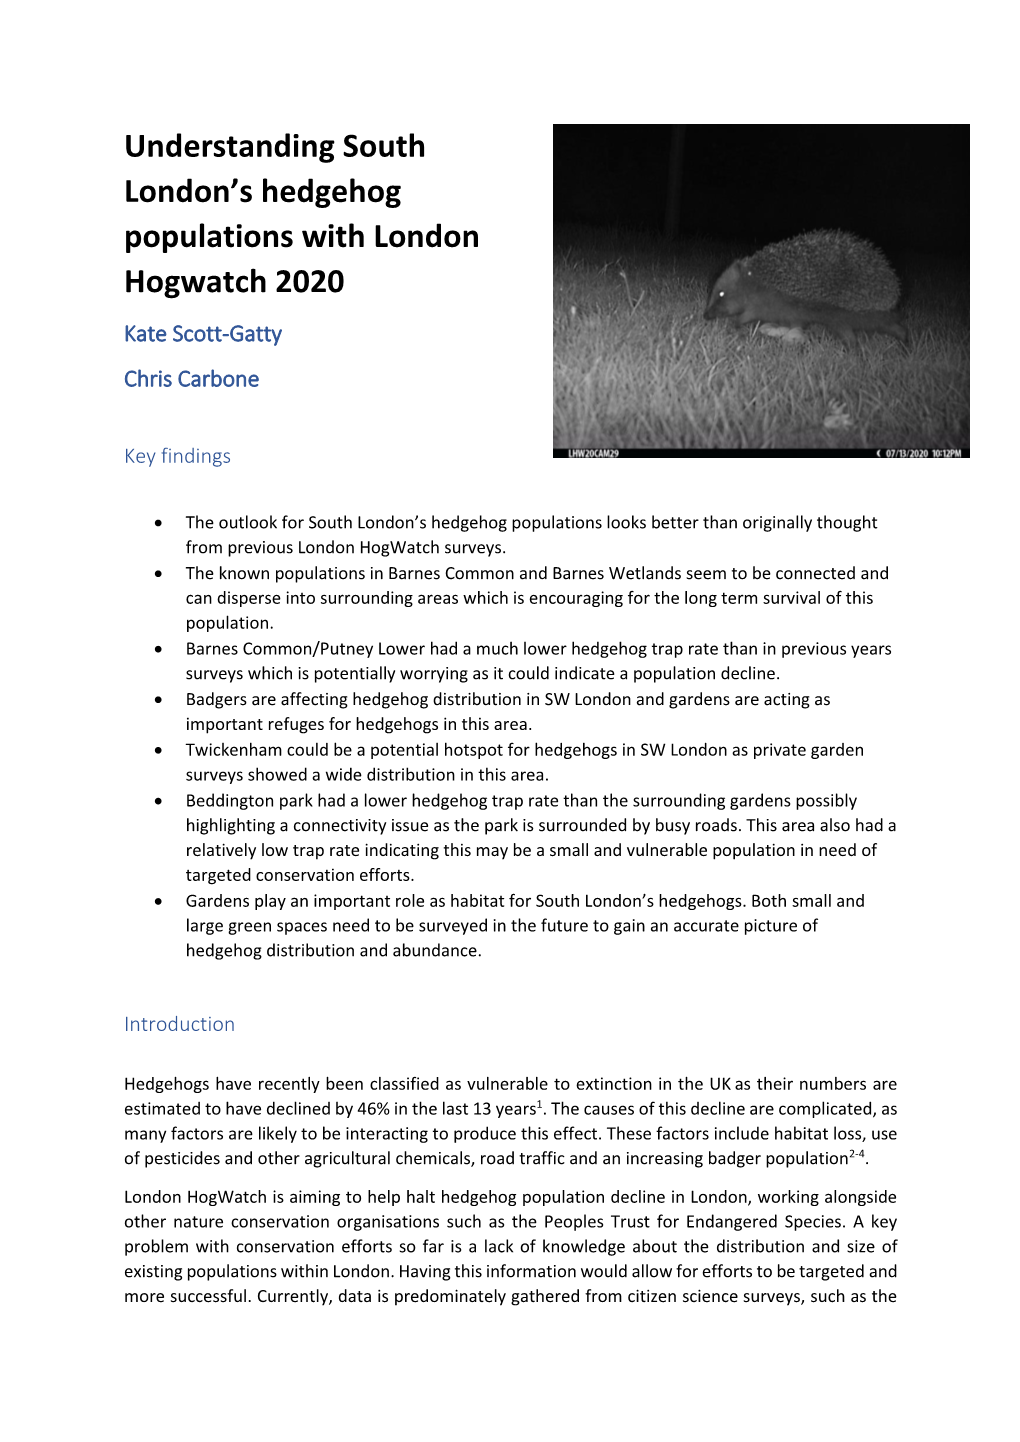 Understanding South London's Hedgehog Populations with London